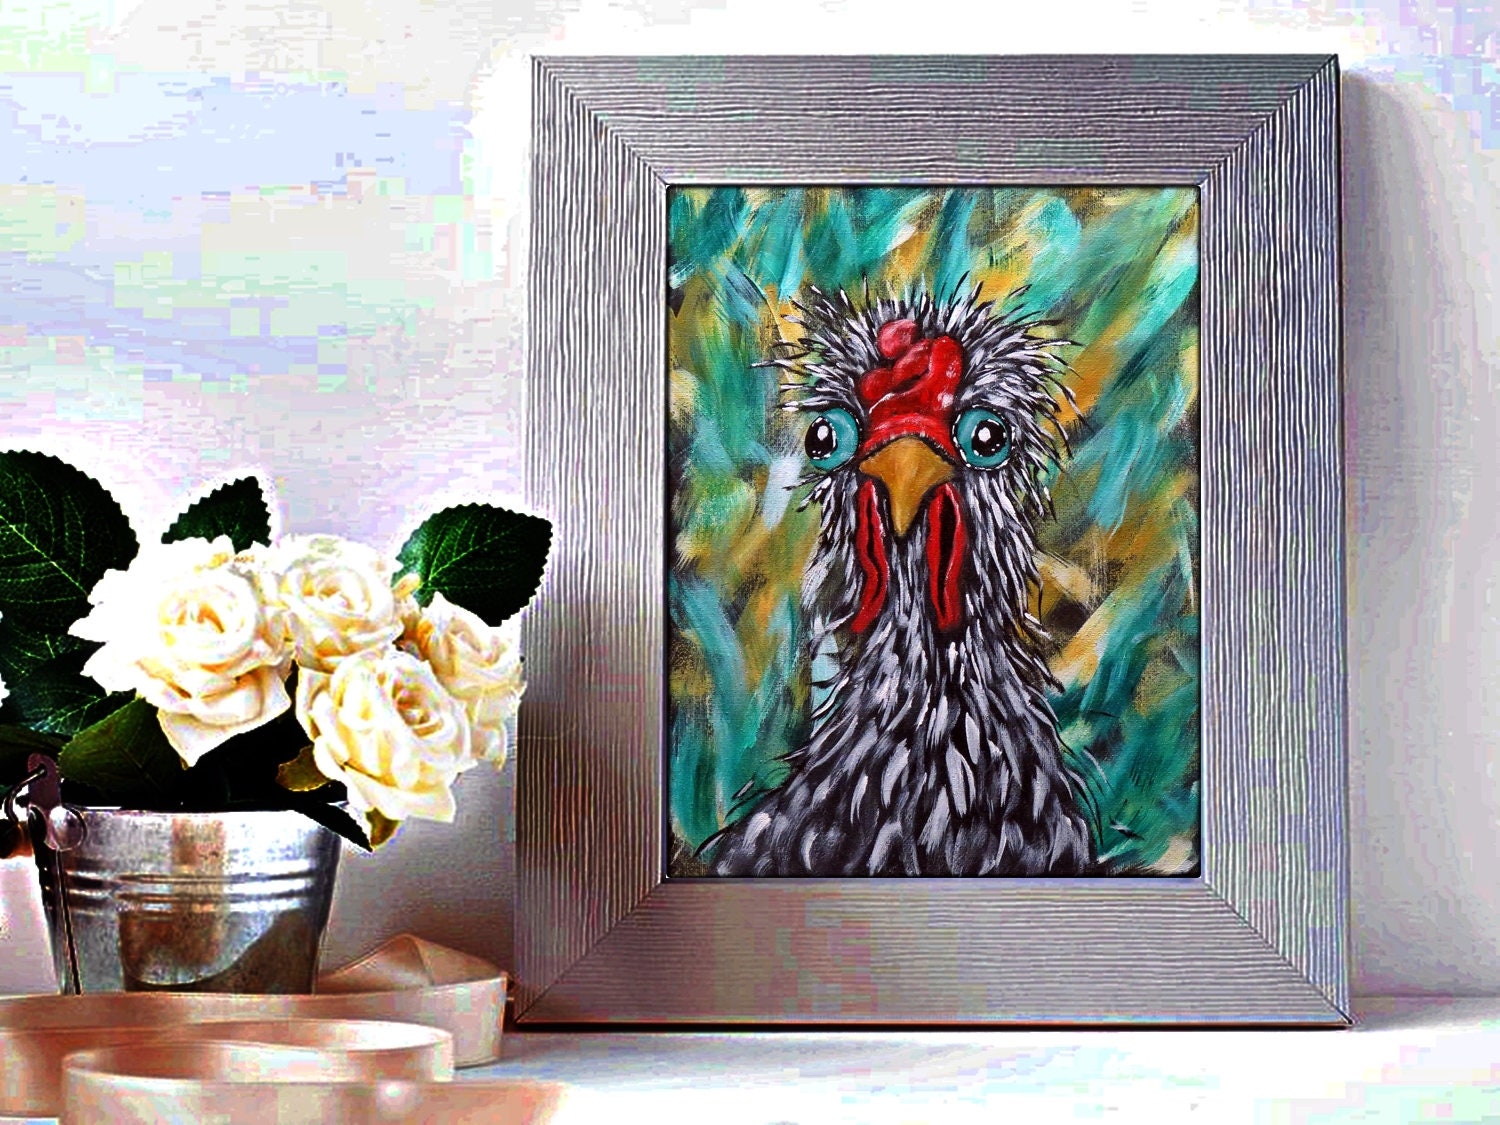 Chicken Wall Art Original Acrylic Painting on Canvas Whimsical Country